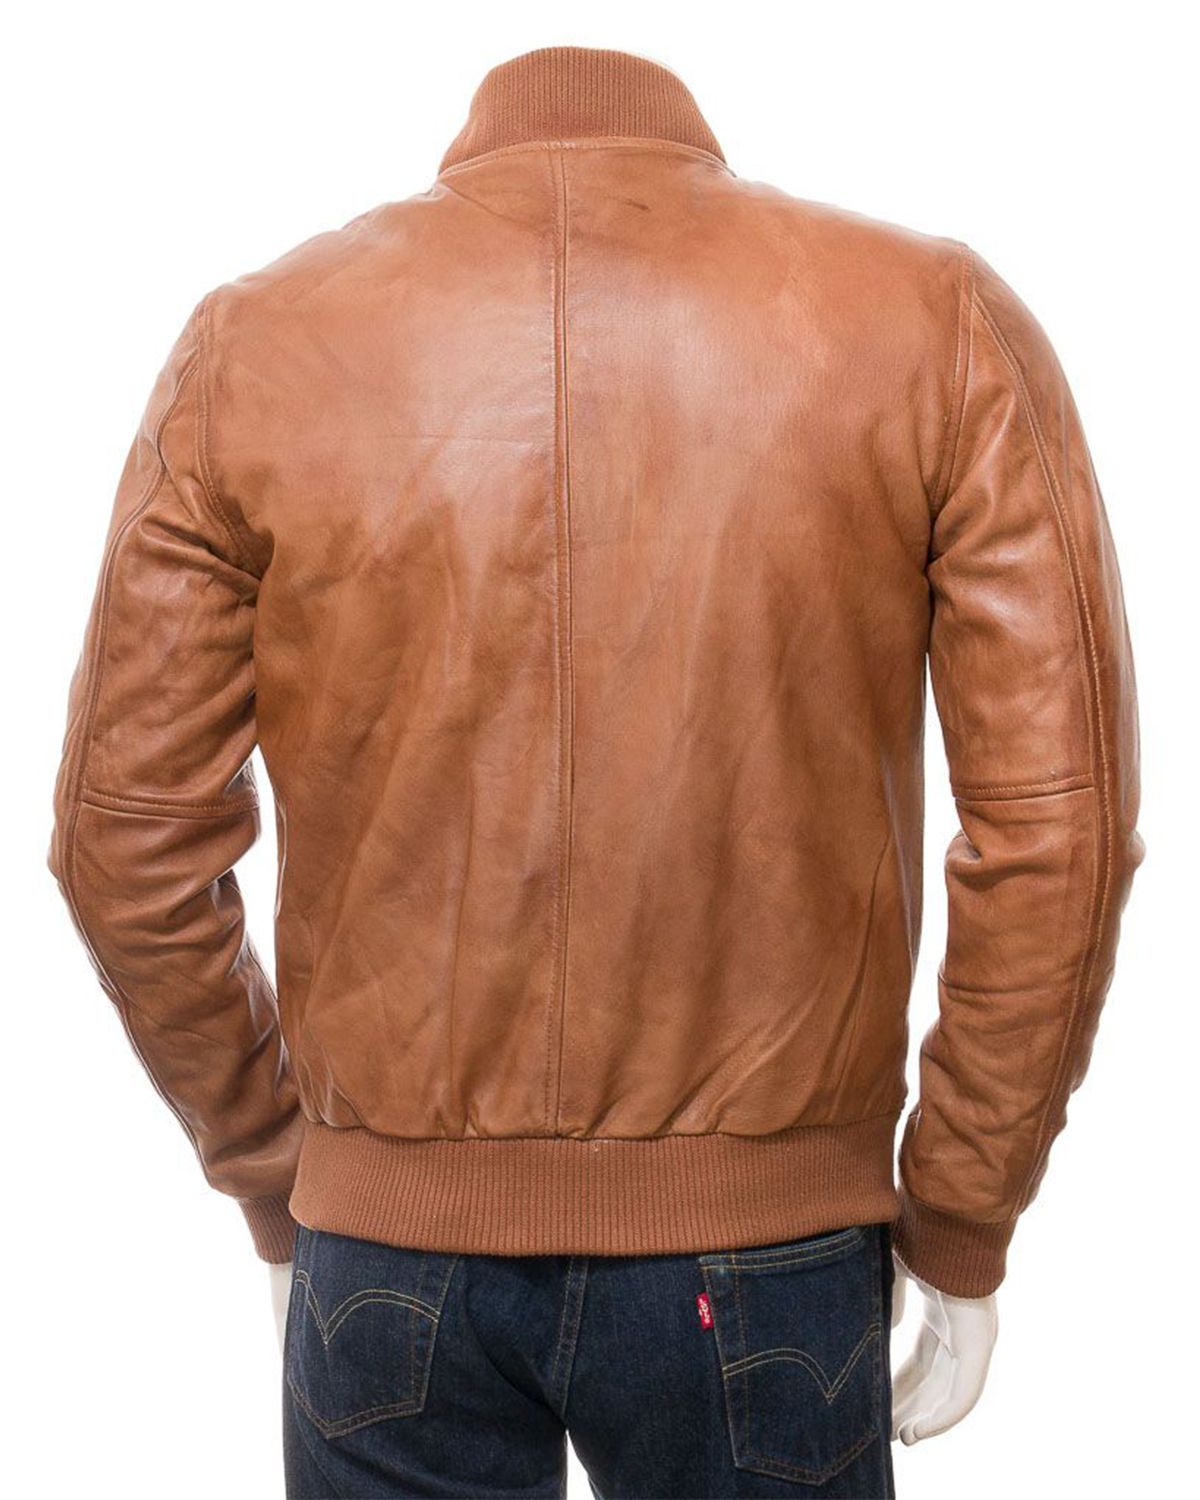 Scin Mens Ribbed Cuffs Tan Brown Bomber Real Leather Jacket by SCIN